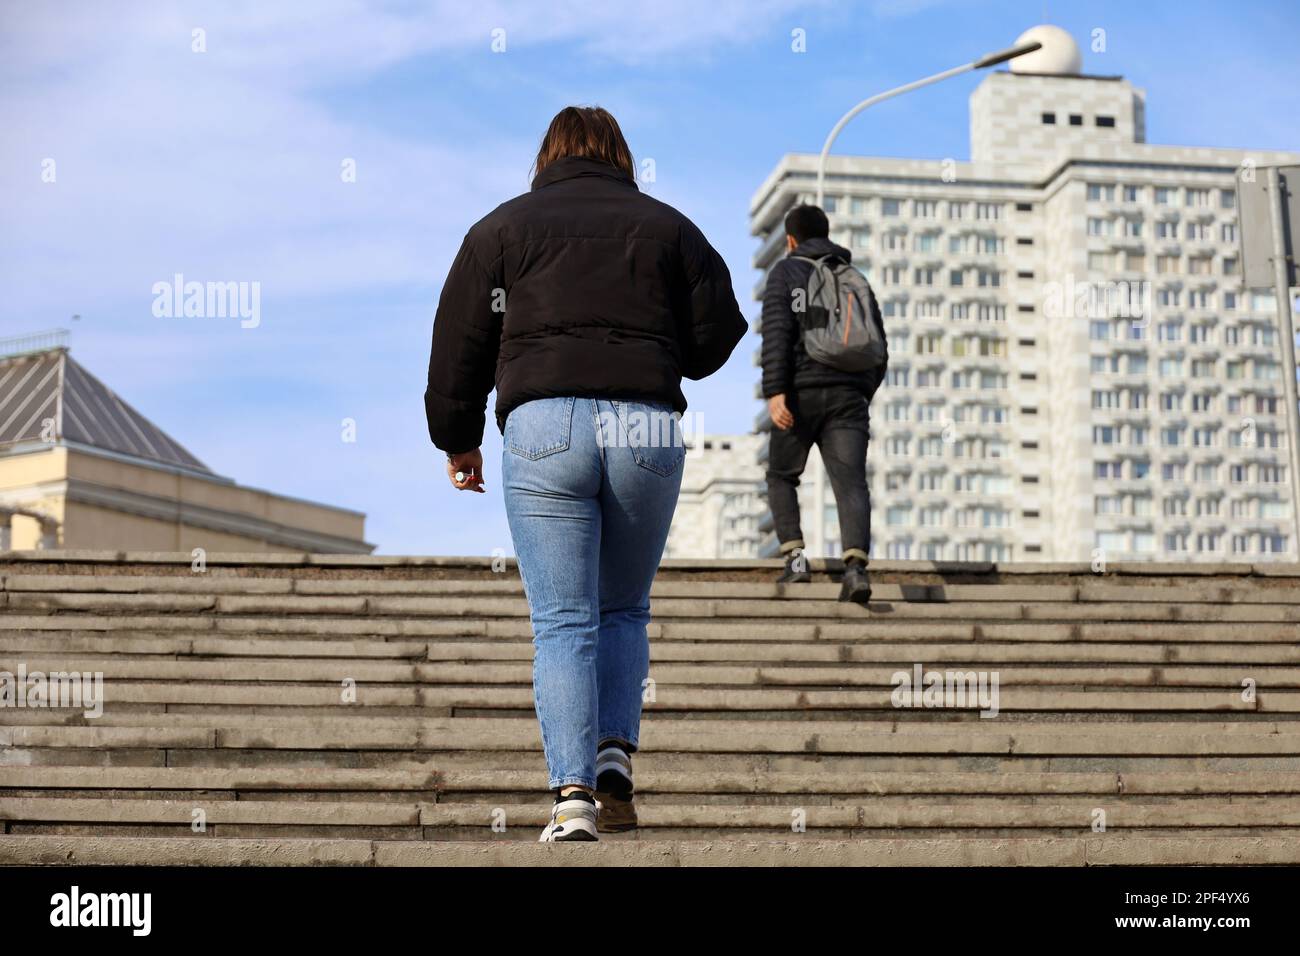 Girl wearing jeans and jacket going up the stone stair, rear view. Female fashion and footwear in spring city Stock Photo